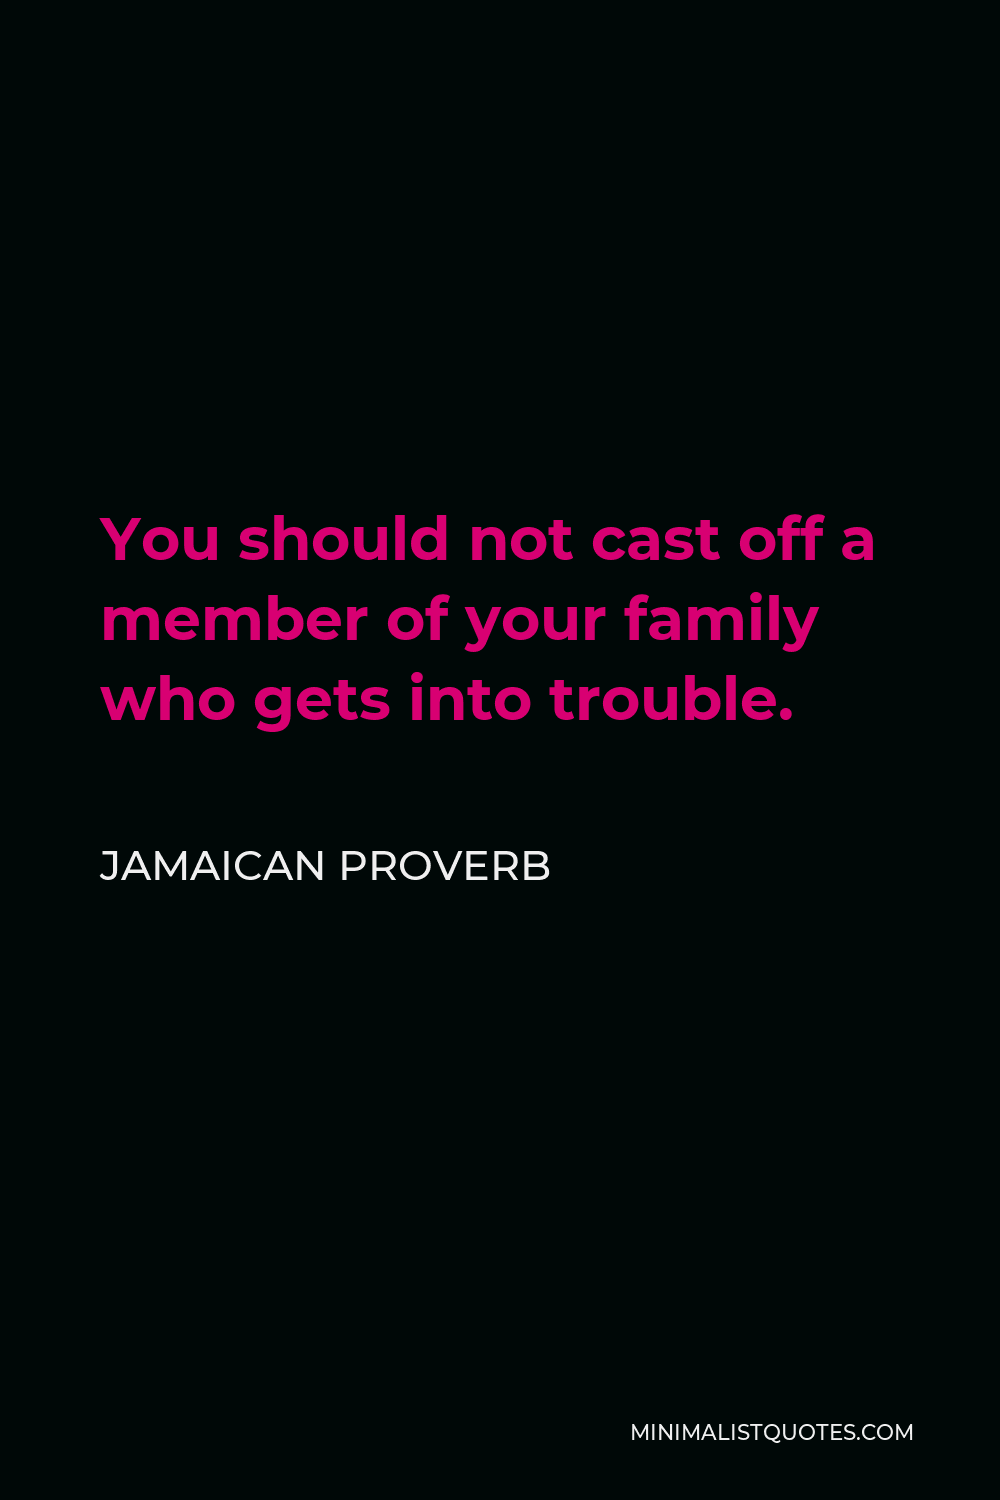 Jamaican Proverb Quote - You should not cast off a member of your family who gets into trouble.